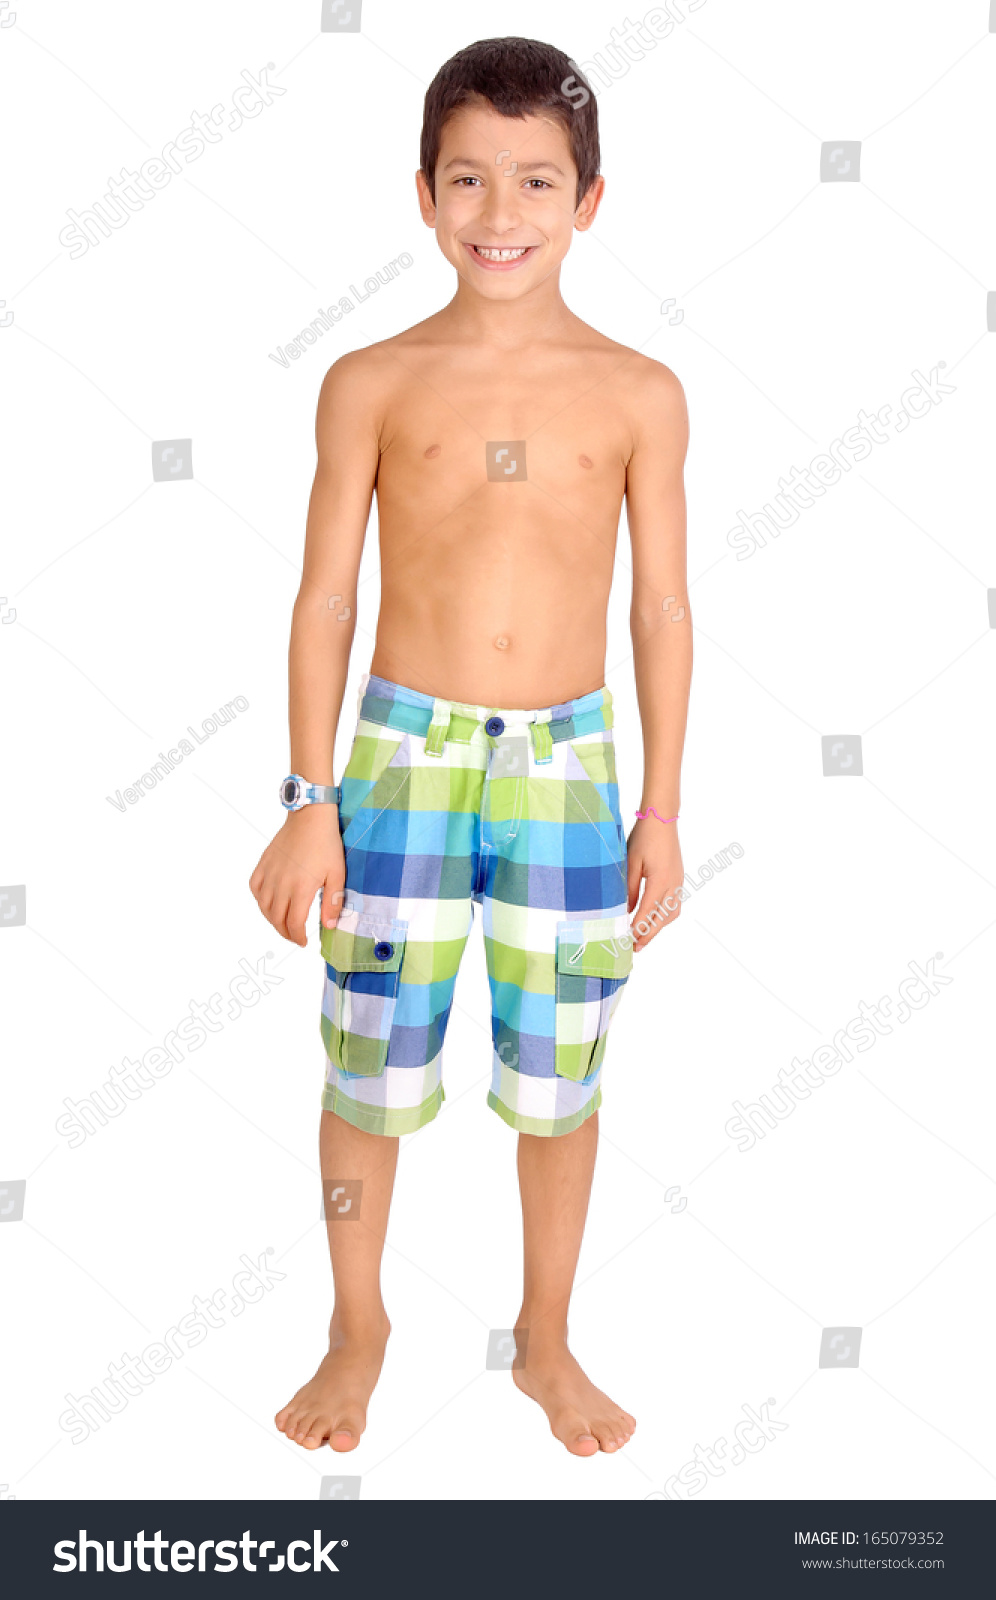 Little Boy With Beach Shorts Isolated In White Stock Photo 165079352 ...